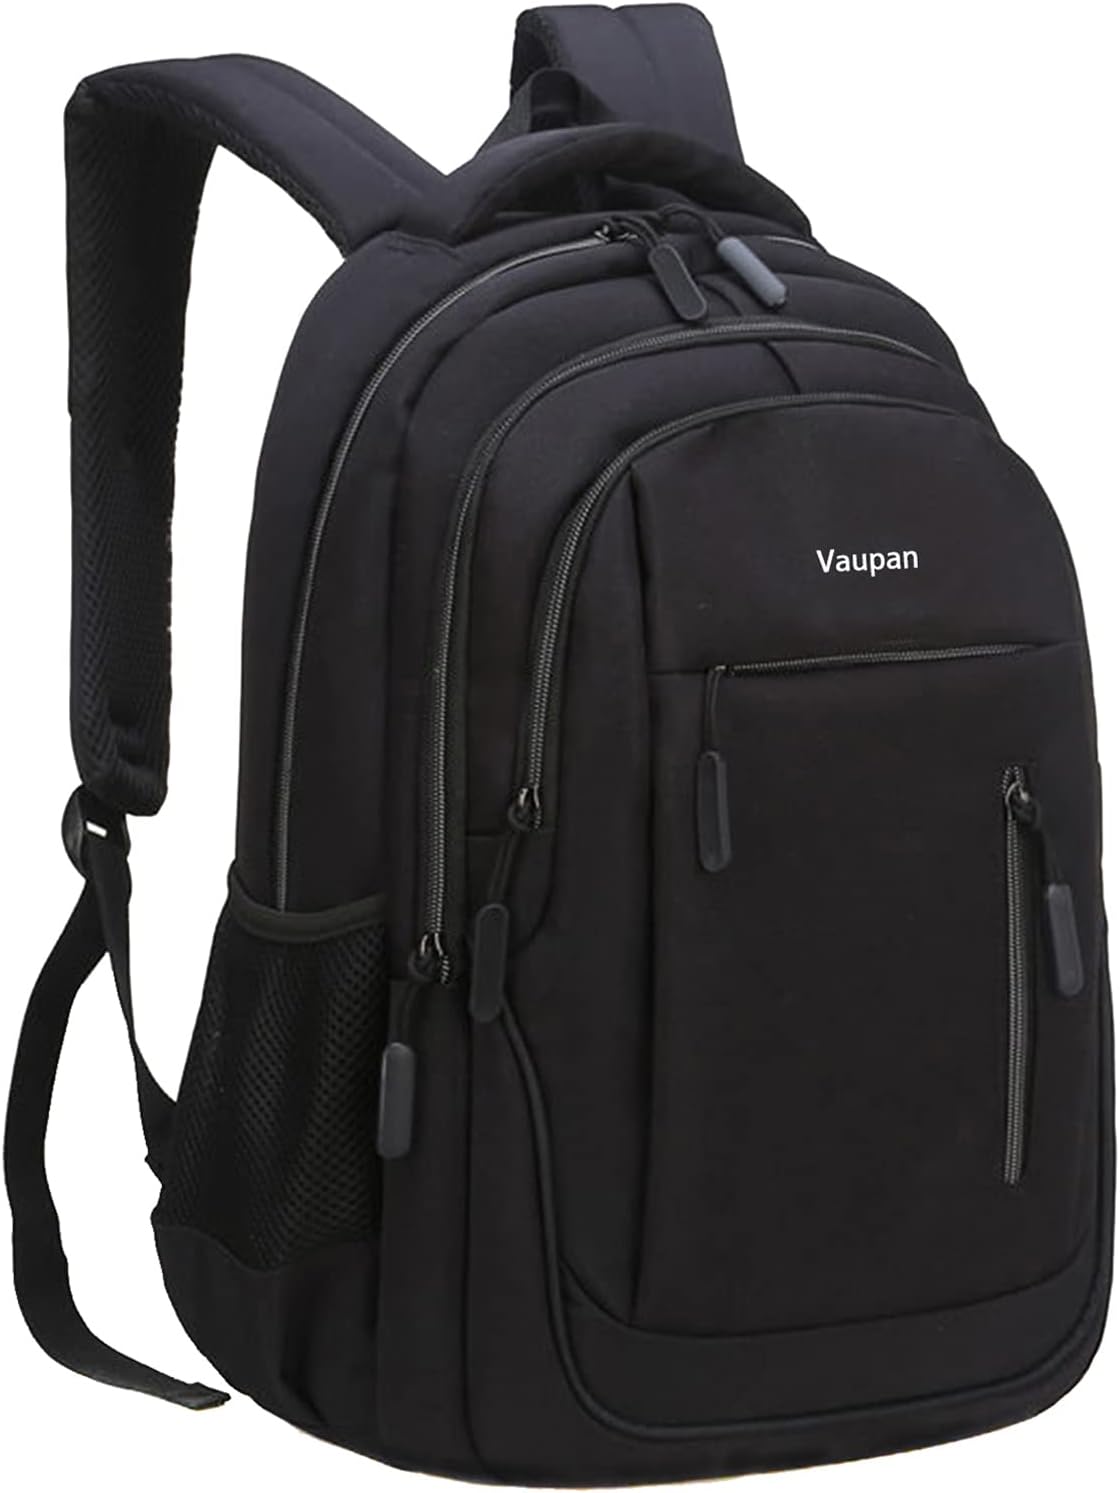 Vaupan Business Travel Laptop Backpack, Water Resistant College School Computer Bag Gifts with USB Charging Port for Men & Women Fits 15.6 Inch Notebook